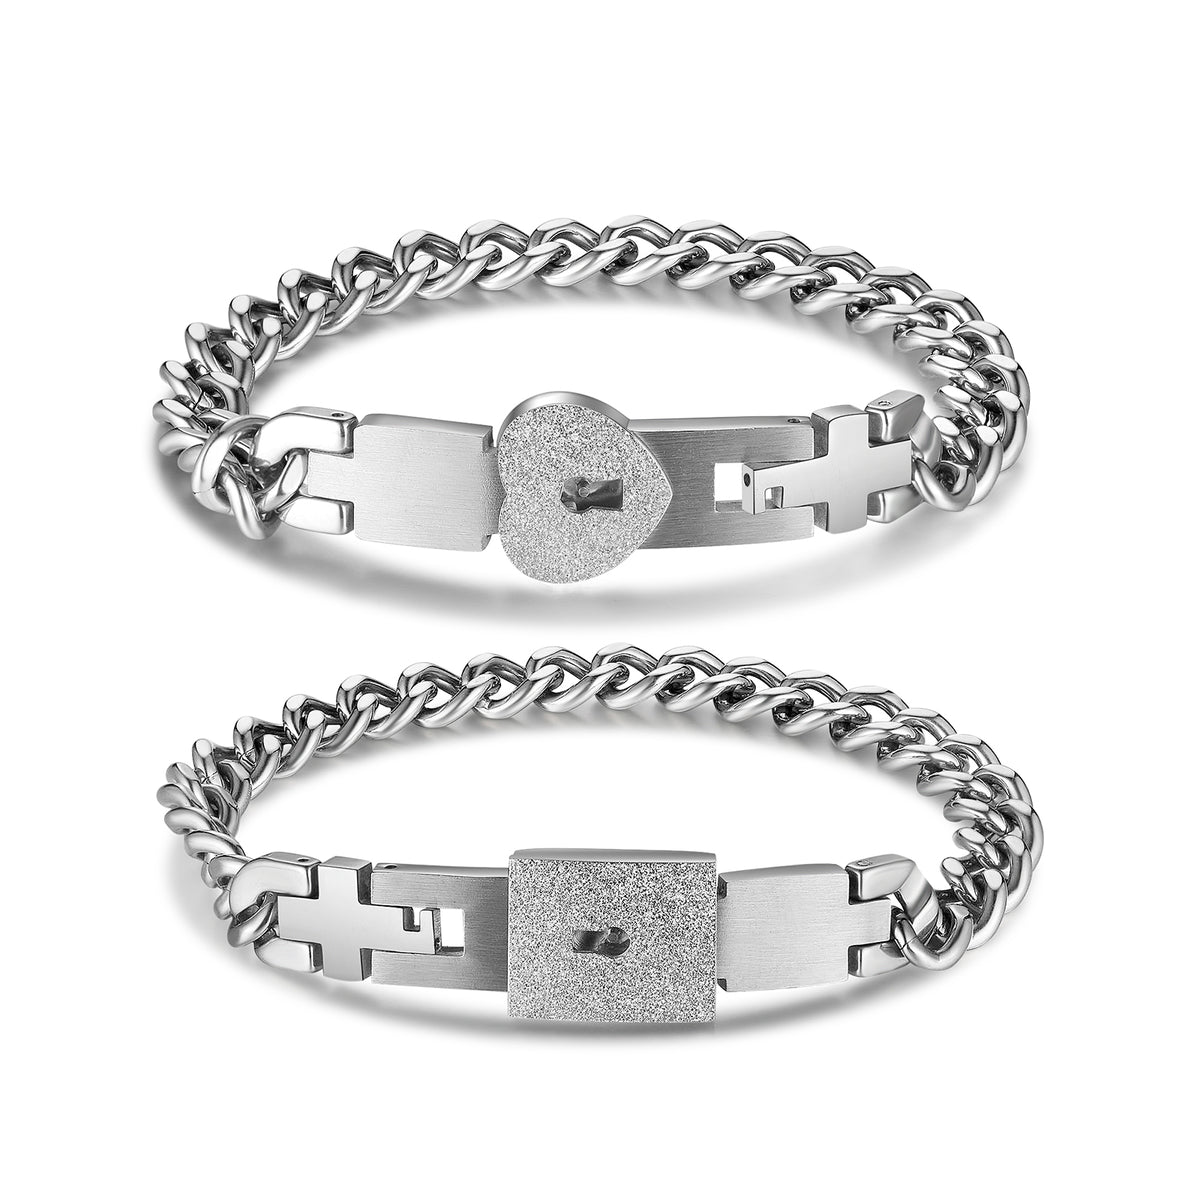 2pcs Silver Tone Stainless Steel Lover Heart Love Lock Bracelet With Lock  Key Bangles Kit Couple Jewelry Sets Gift | Fruugo MY